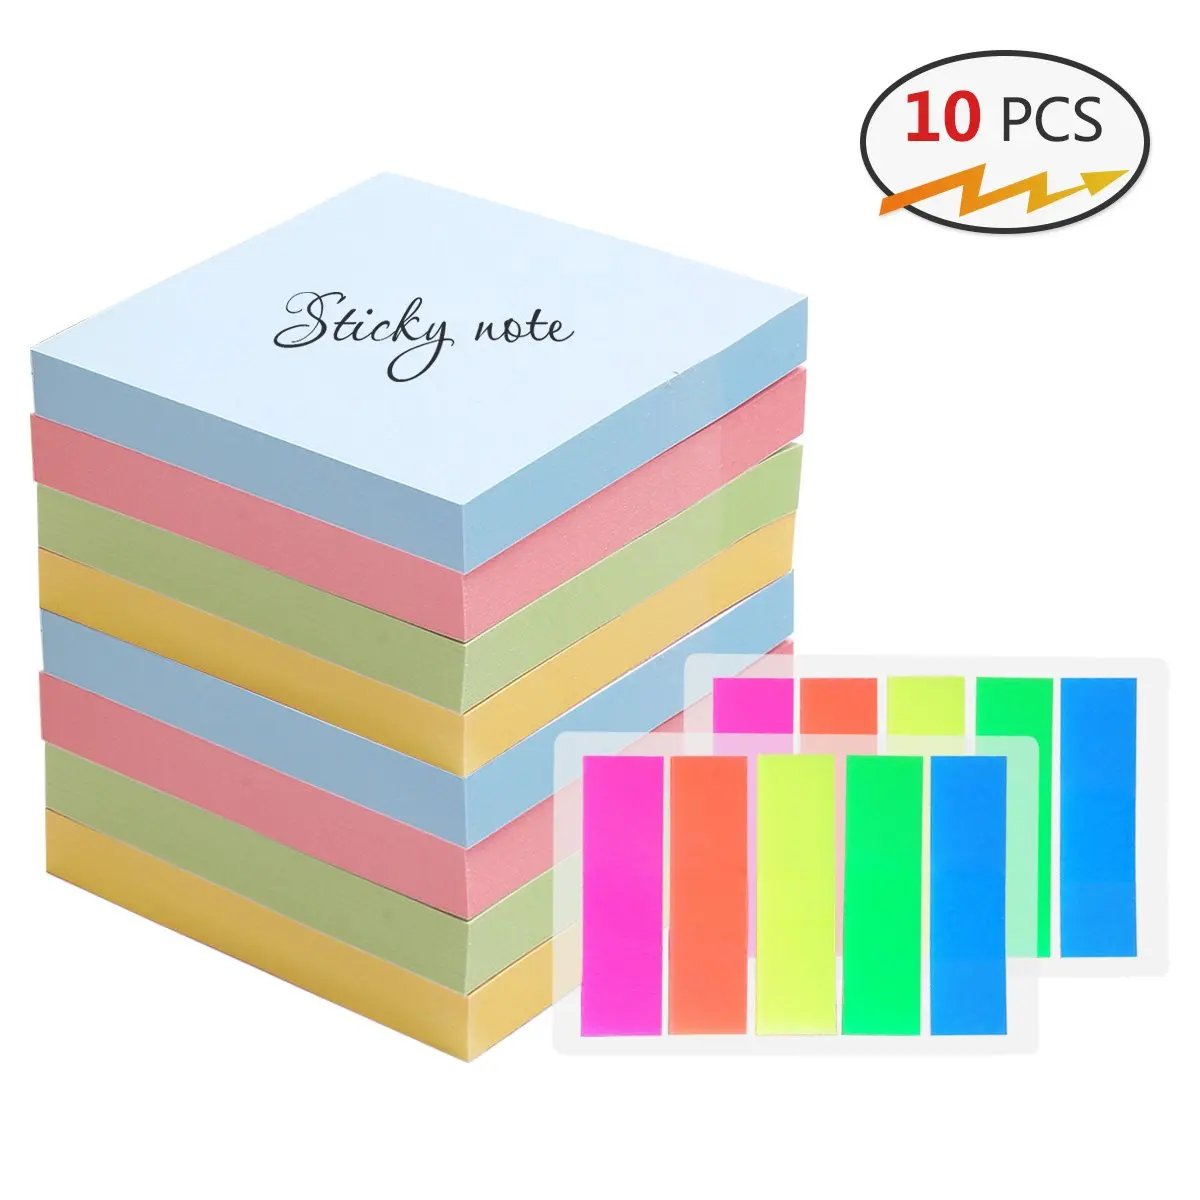 12 Pads Super Sticky Recycled Notes Fun Sticky Notes for Office Notebook Super Stickies Sticky Notes 1200 Sheets Blue, Pink, Orange, Yellow, Green, Rose 6 Colors Bright Colors Self-Stick Pads School Mini Notes Home 3x3in Sticky Note Tabs